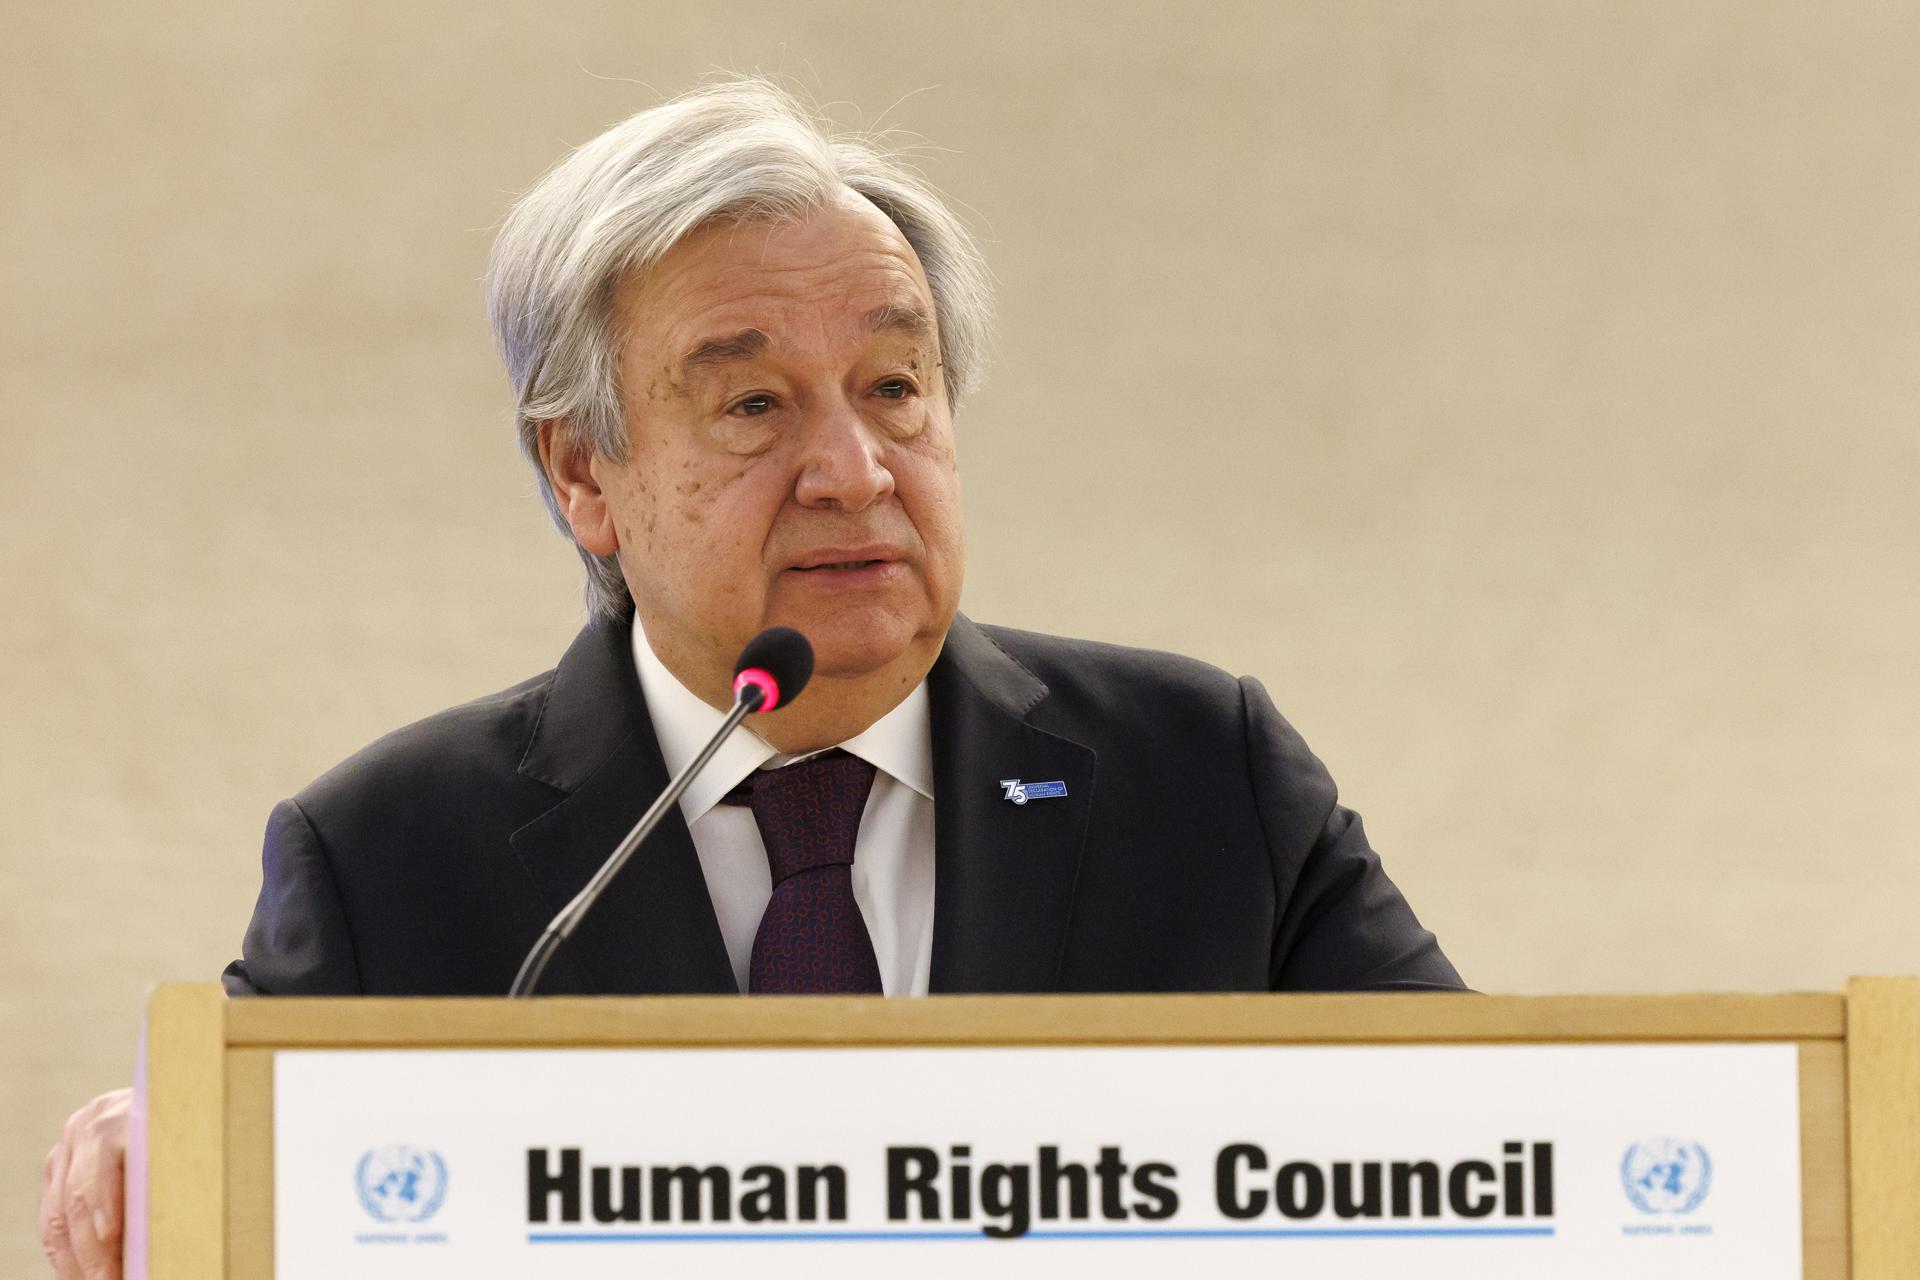 U.N. Secretary-General Antonio Guterres adresses his statement, during the opening of the High-Level Segment of the 52nd session of the Human Rights Council, at the European headquarters of the United Nations in Geneva, Switzerland, 27 February 2023.EFE/EPA/SALVATORE DI NOLFI